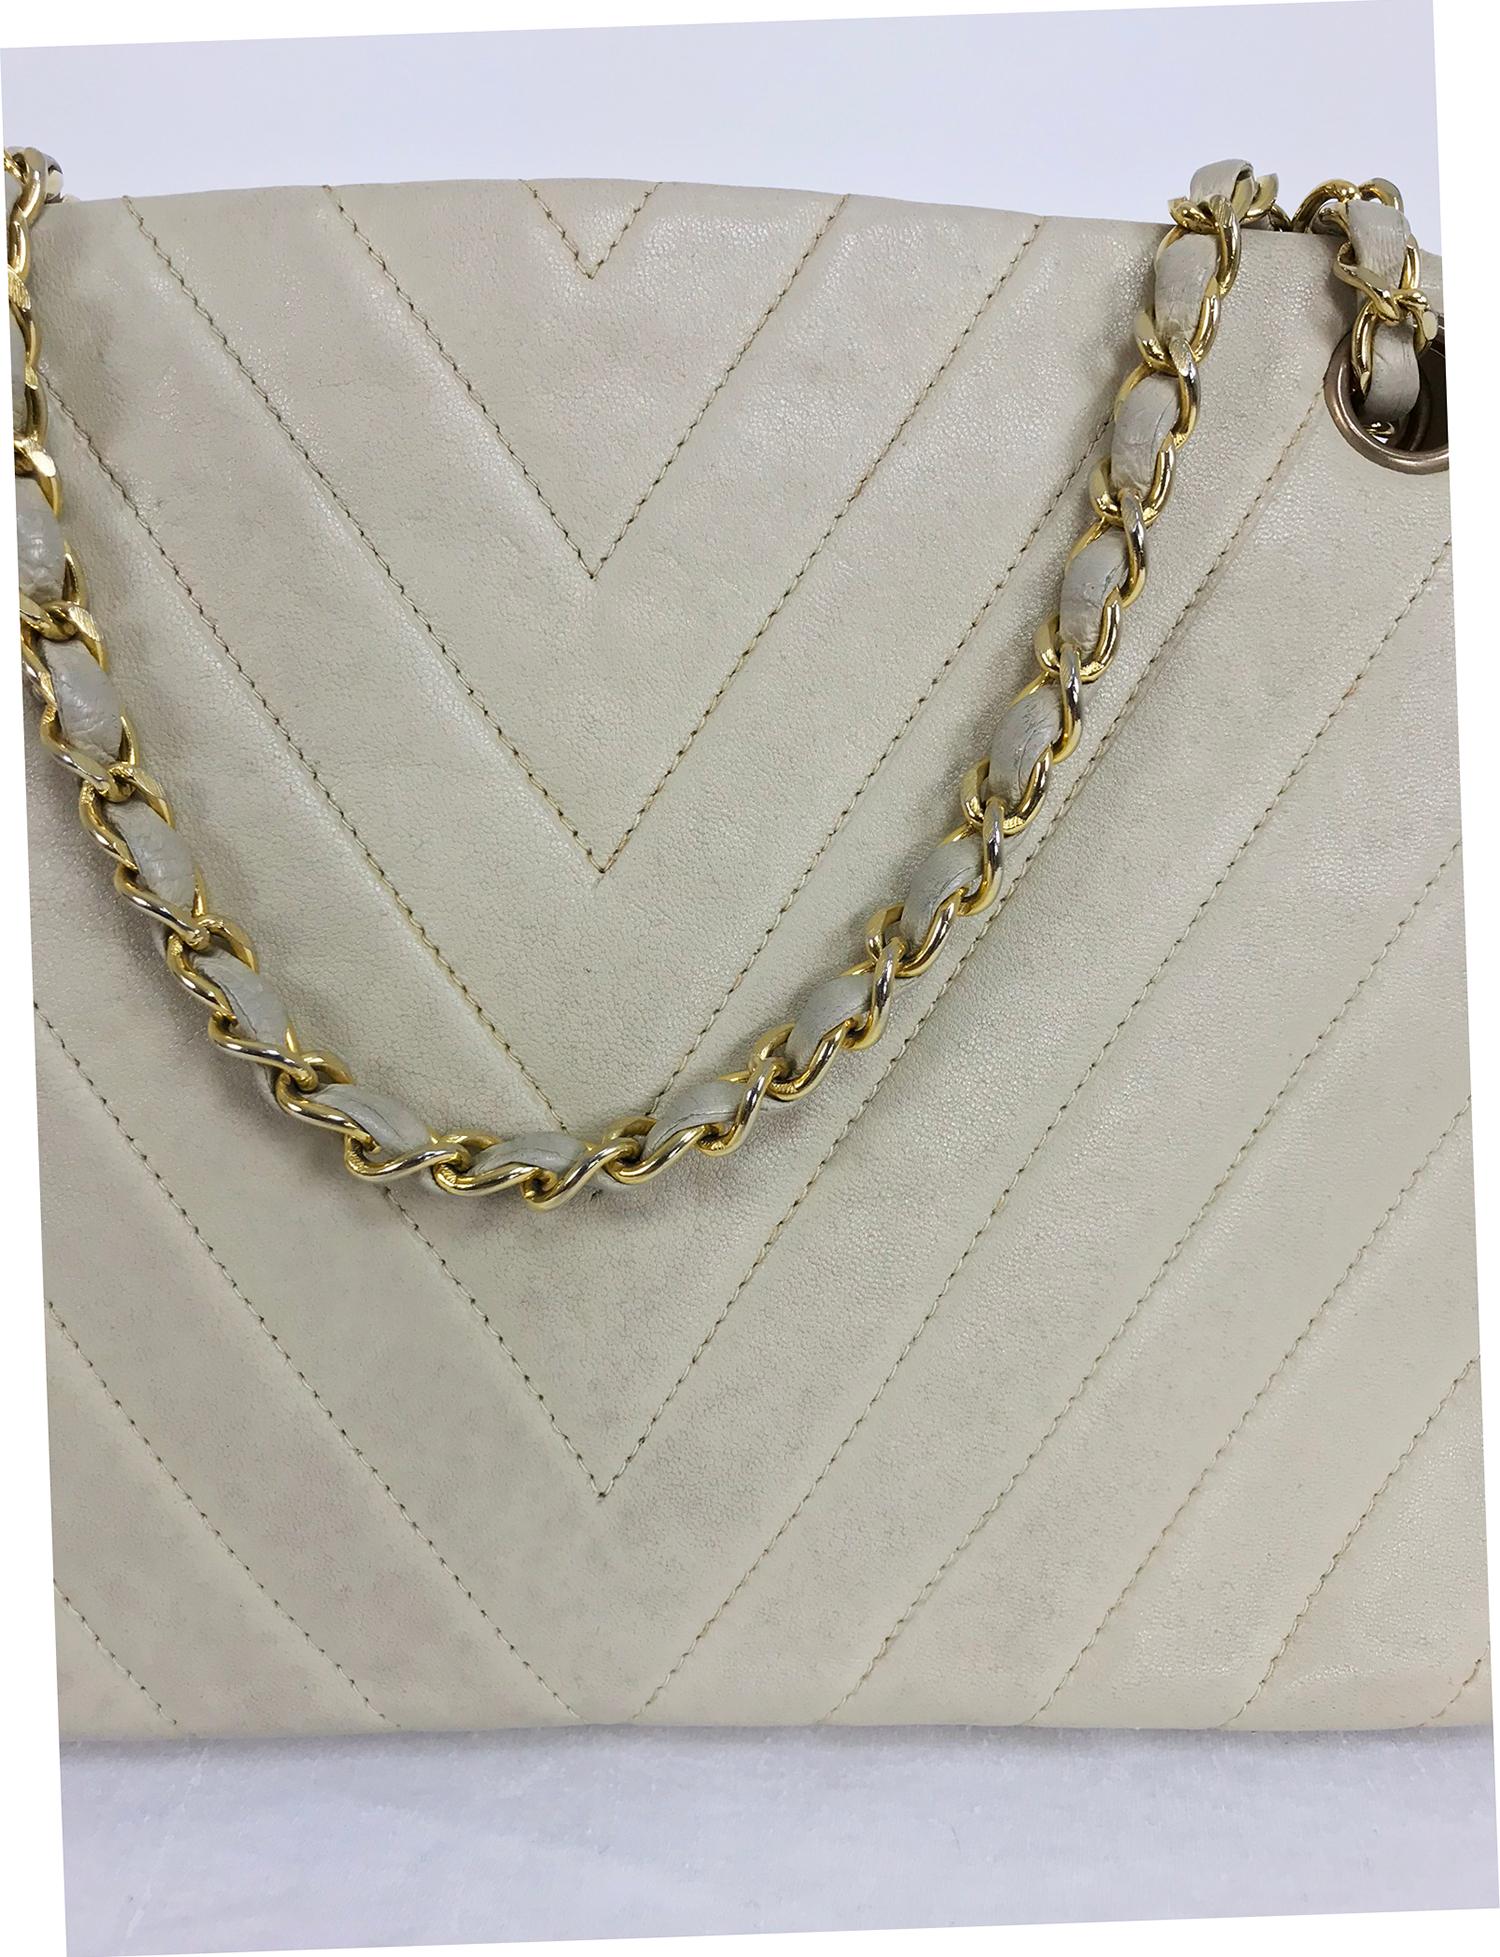 Chanel 1980s ivory chevron quilted, kiss lock, chain handle bag. Unusual Chanel bag has a center compartment that closes with a kiss lock clasp, inside you will find cream leather lining with silk interiors. There is a flap compartment with a slip